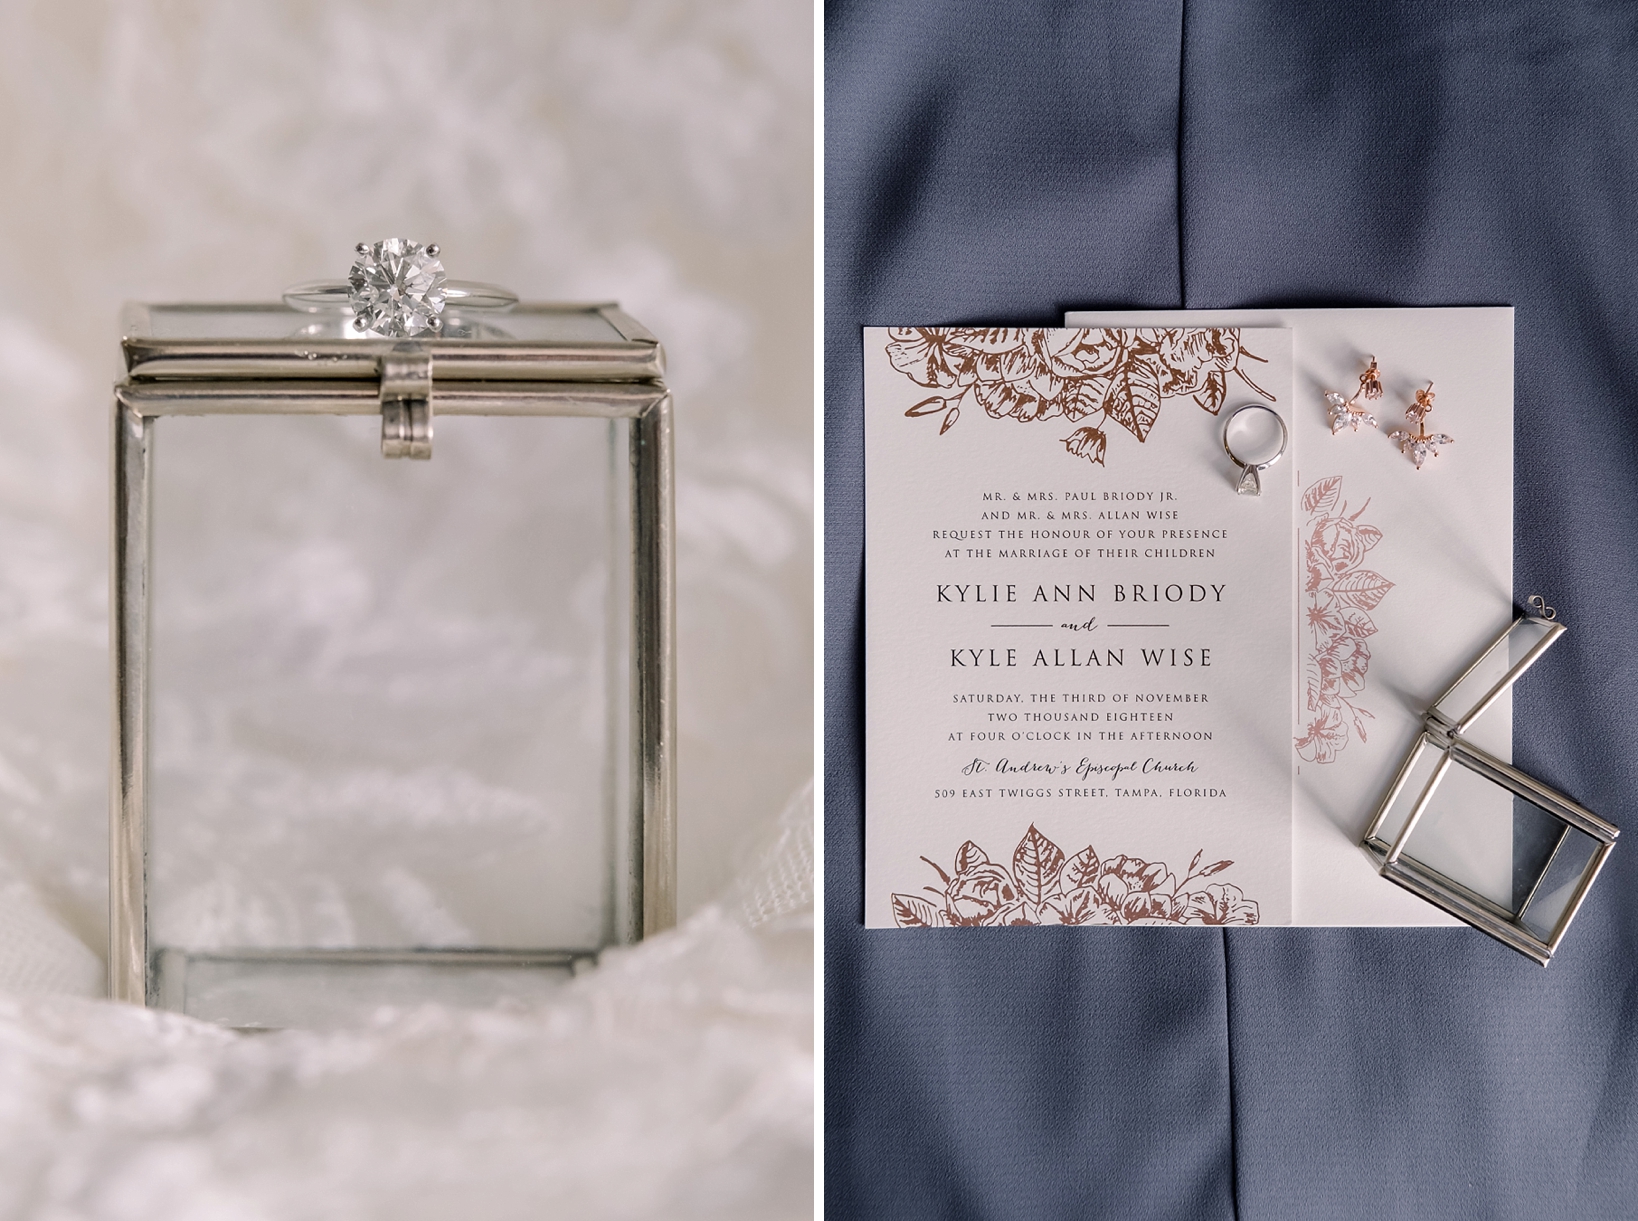 Wedding ring on a glass box and foil stamped wedding invitations by Sarah & Ben Photography